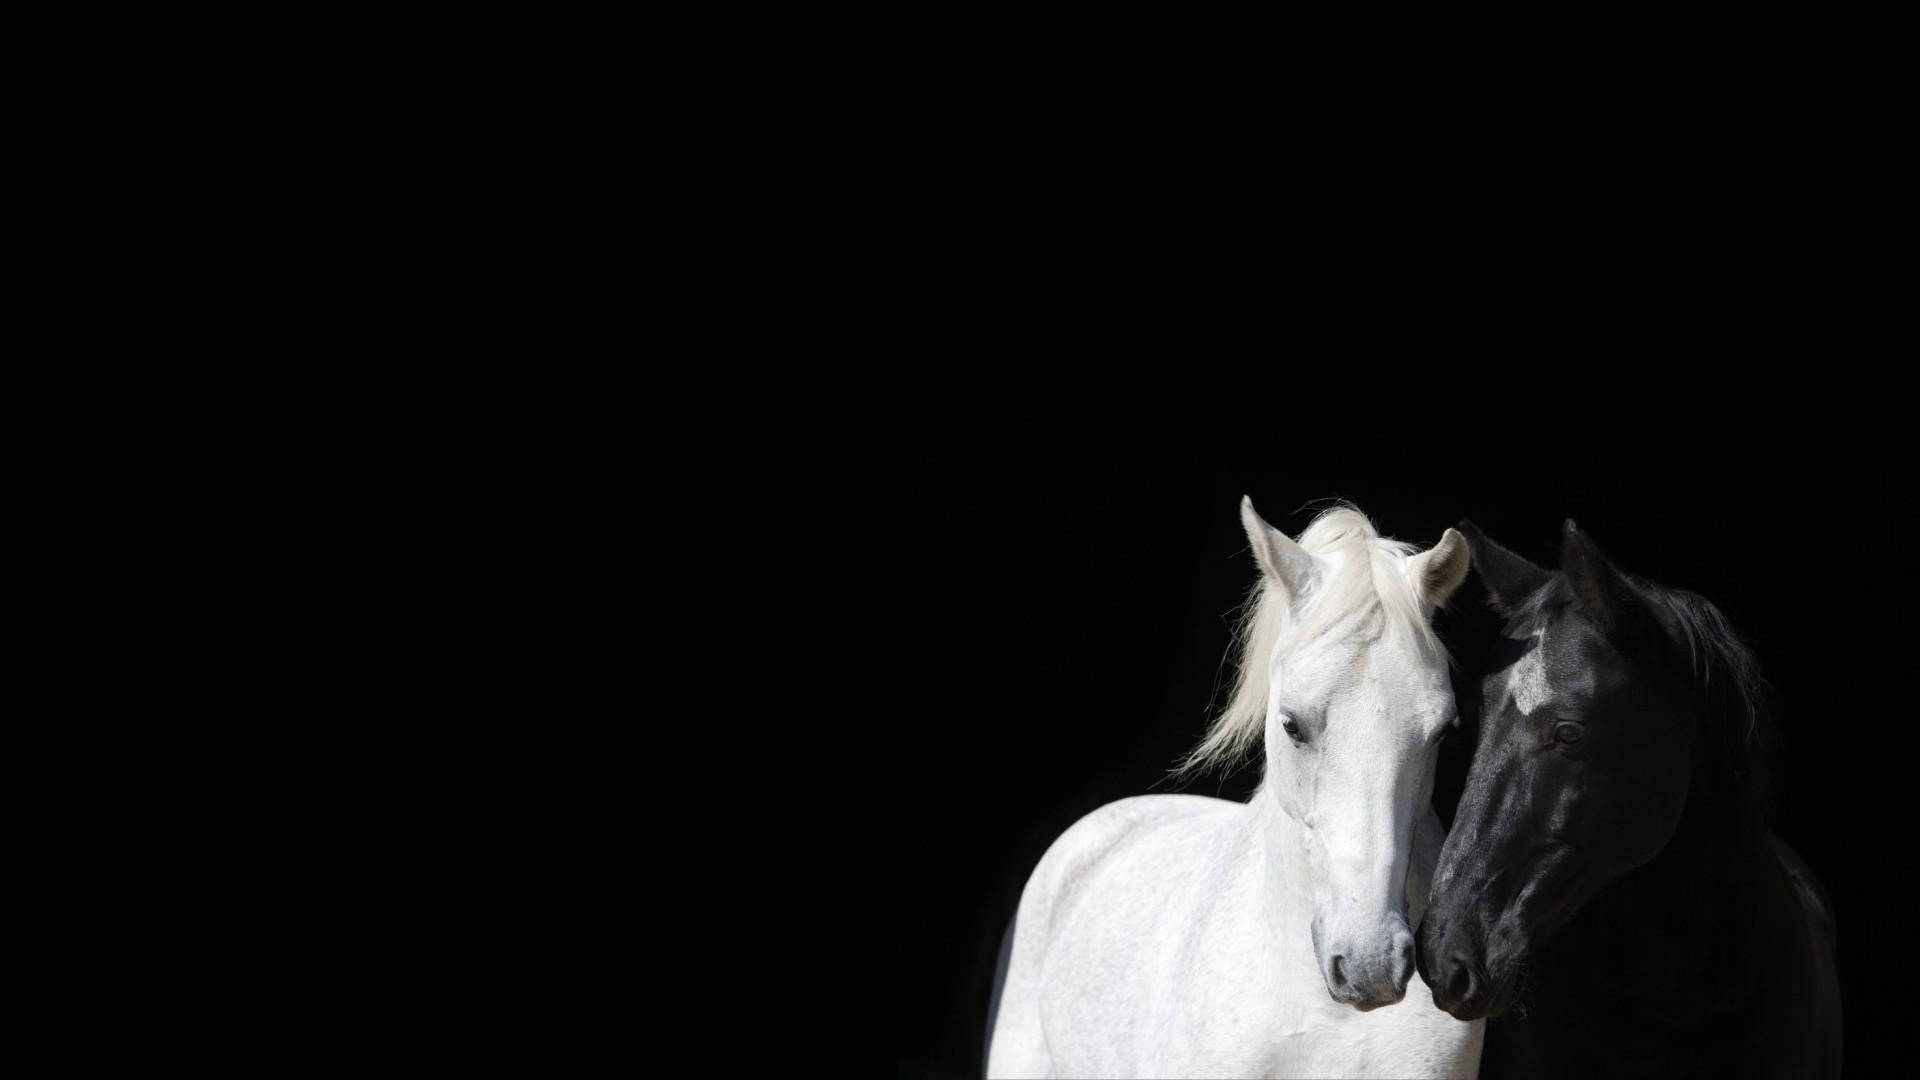 100+] White Horse Wallpapers | Wallpapers.Com